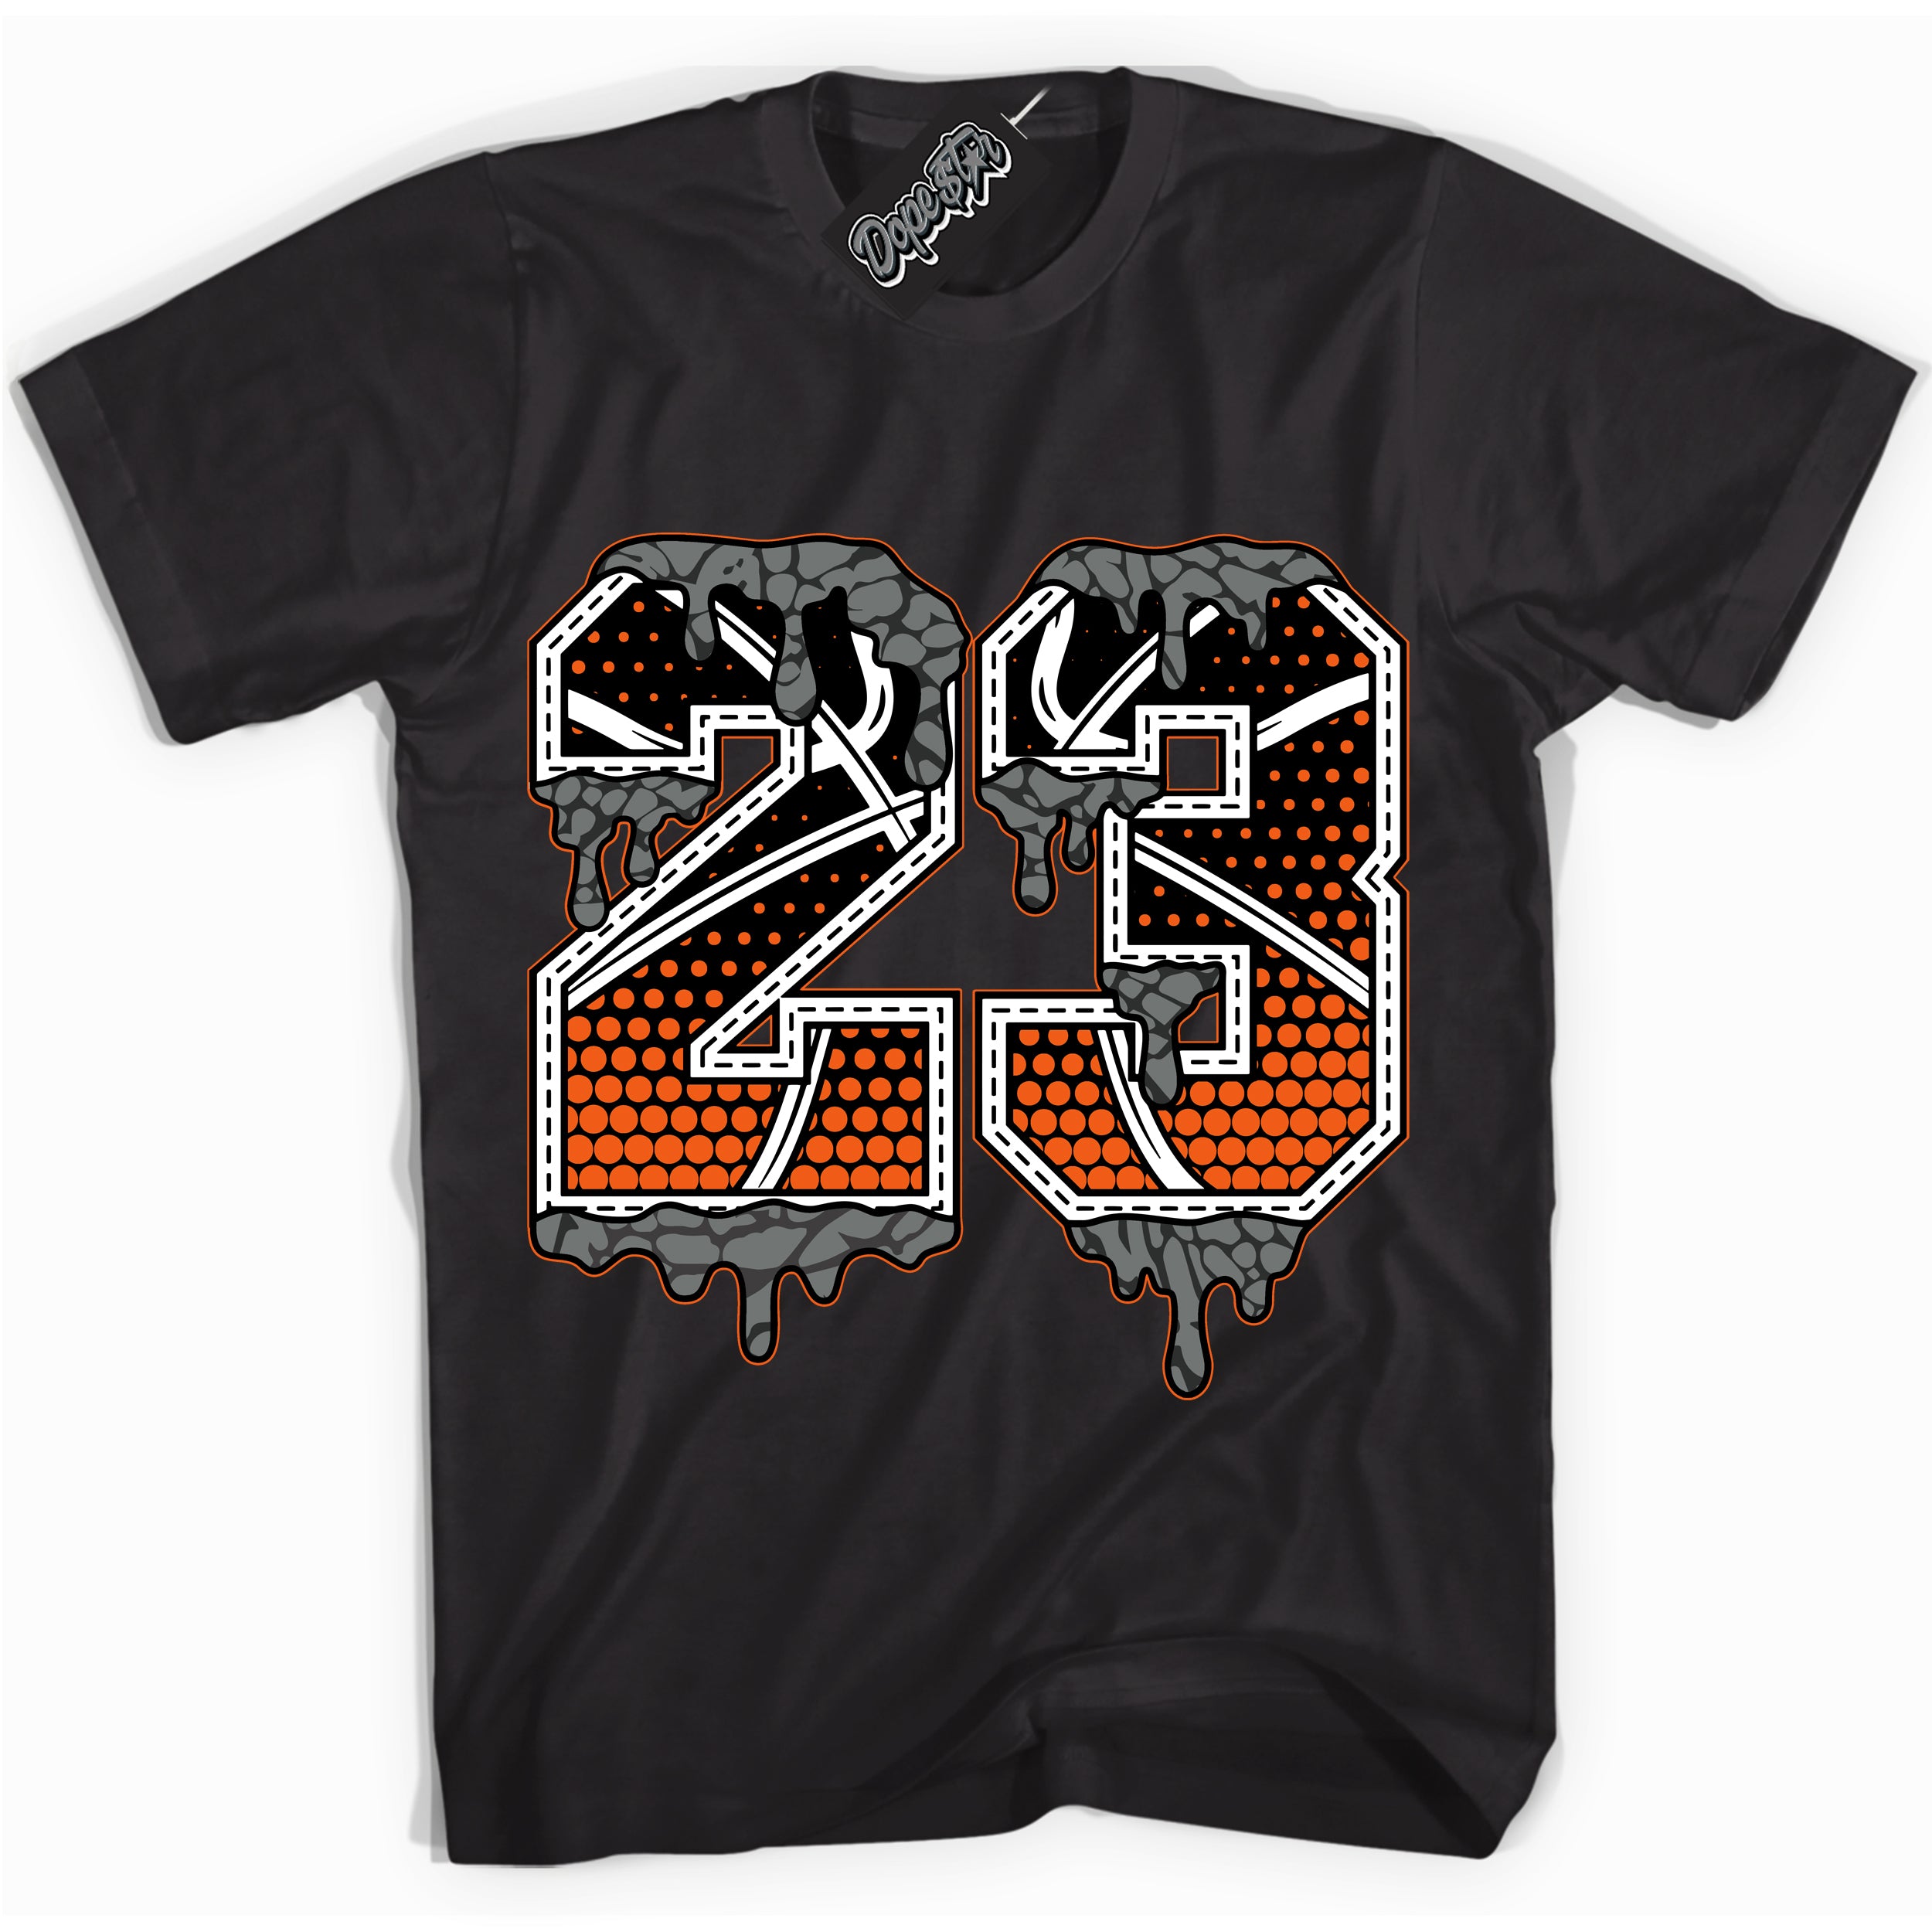 Cool Black graphic tee with “ 23 Ball ” design, that perfectly matches Fear Pack 3s sneakers 